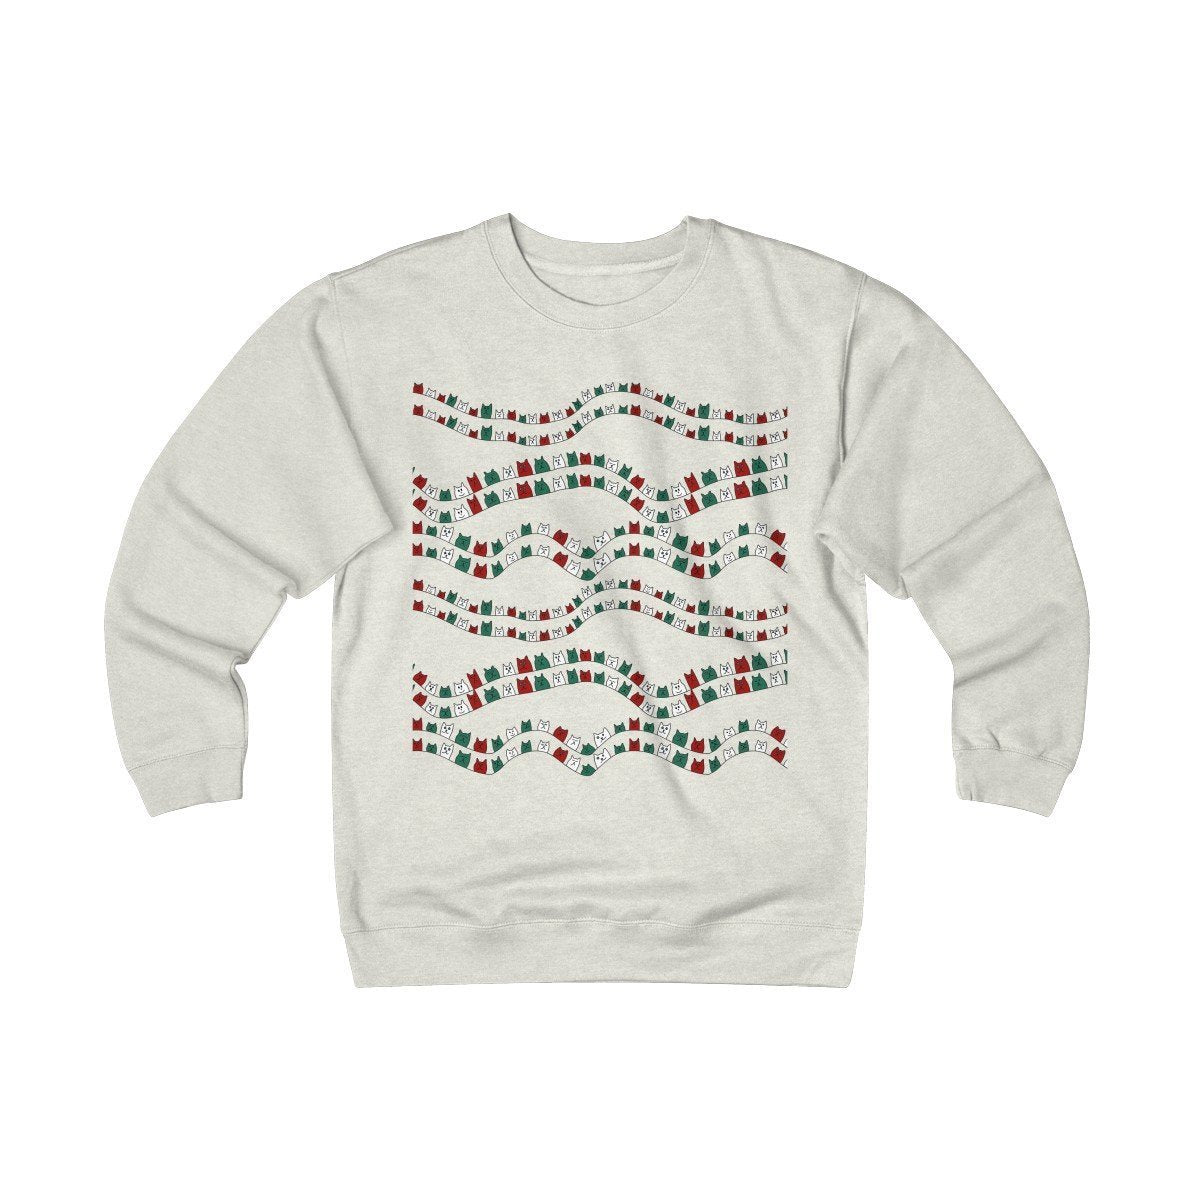 Pick this funny cat Christmas sweater for men as a unique Christmas gift for cat lovers. The cat sweater features red white and green cats.